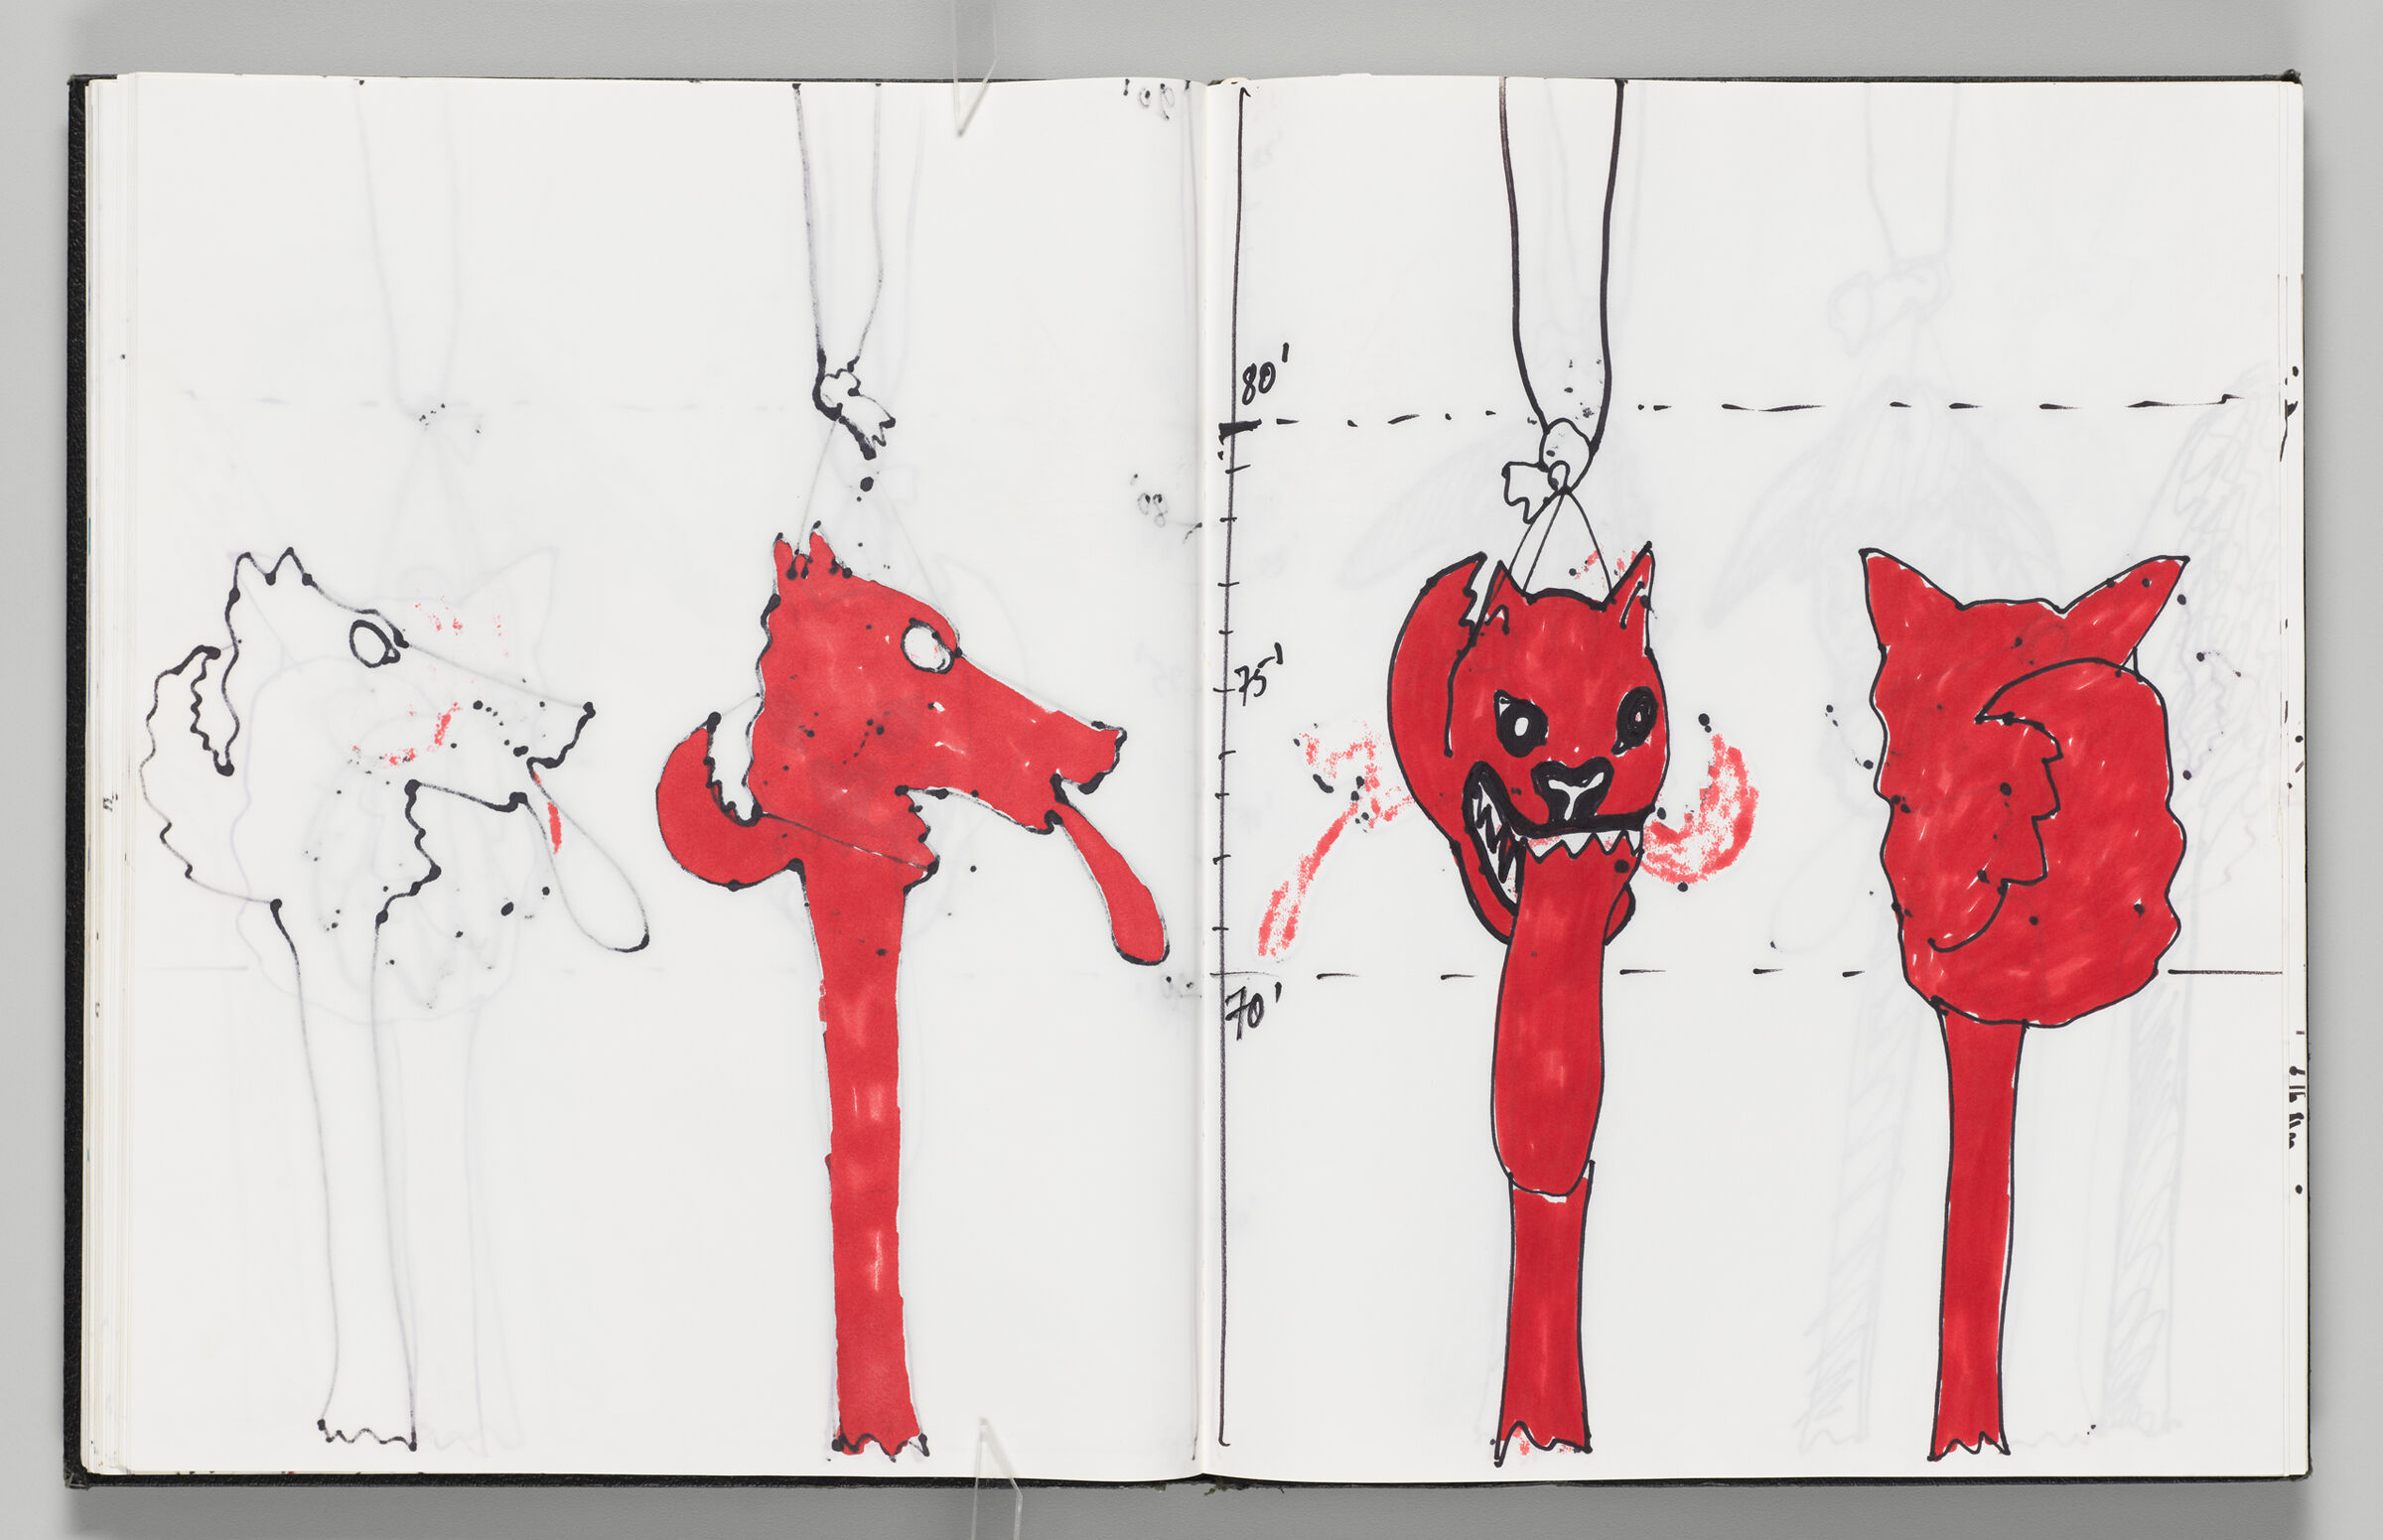 Untitled (Bleed-Through Of Previous Page, Left Page); Untitled (Scale Of Dog Inflatable With Faint Color Transfer, Right Page)